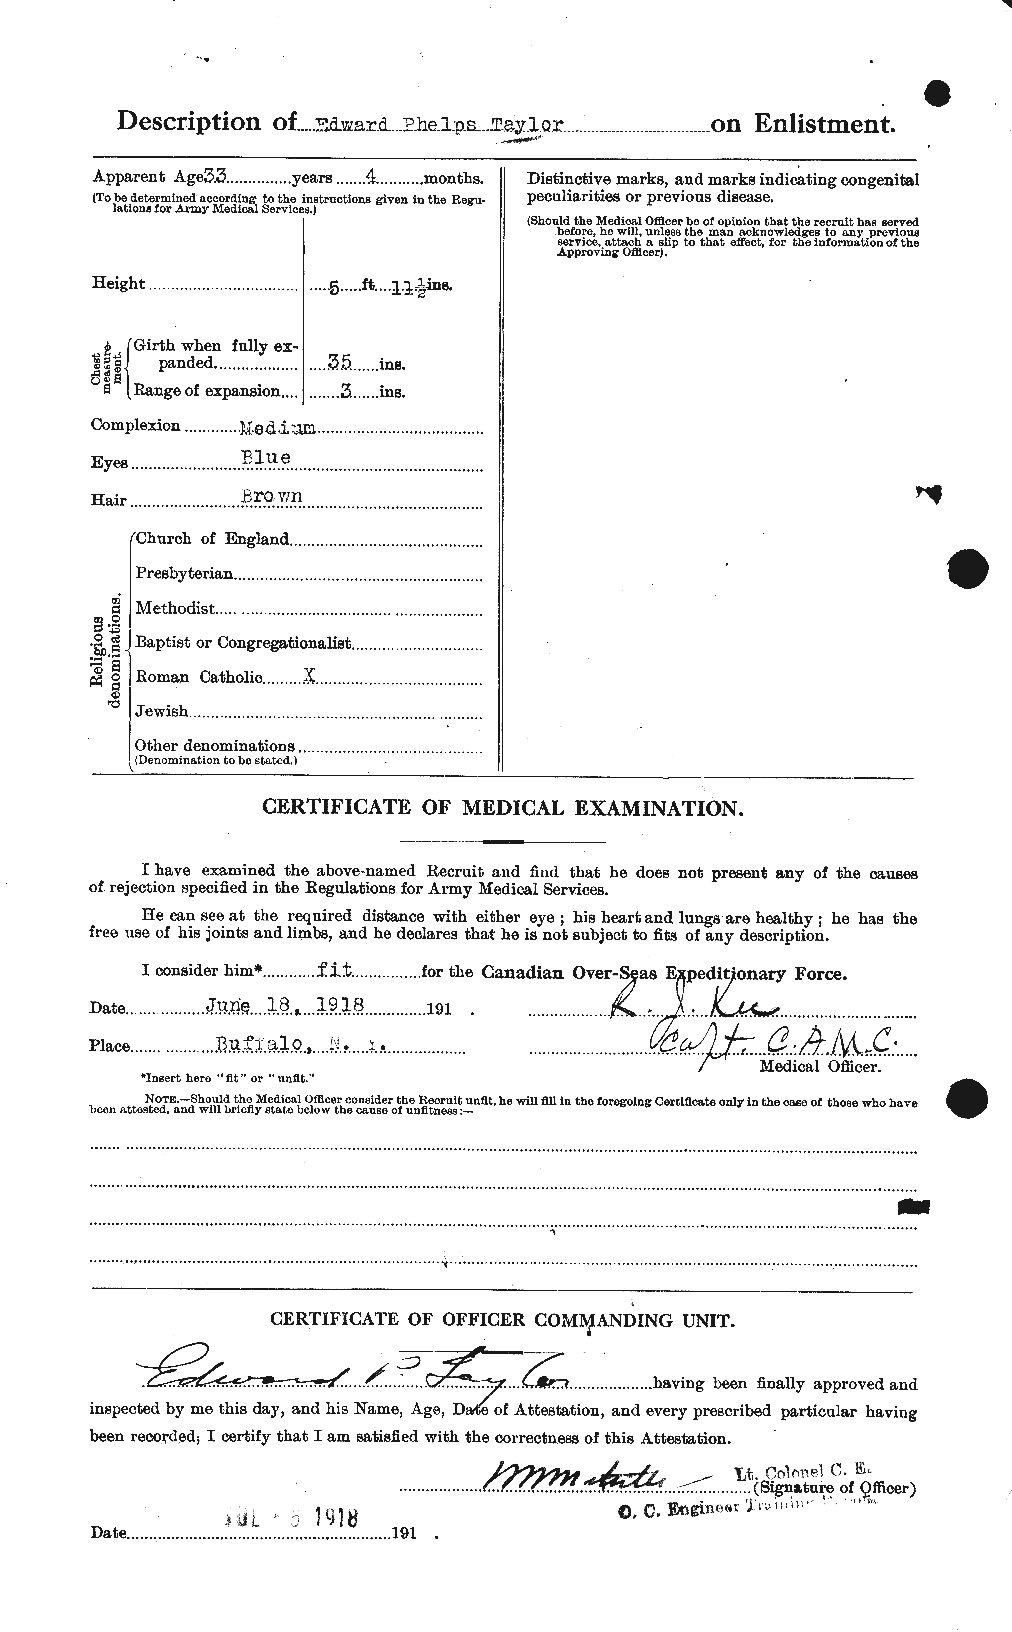 Personnel Records of the First World War - CEF 627324b